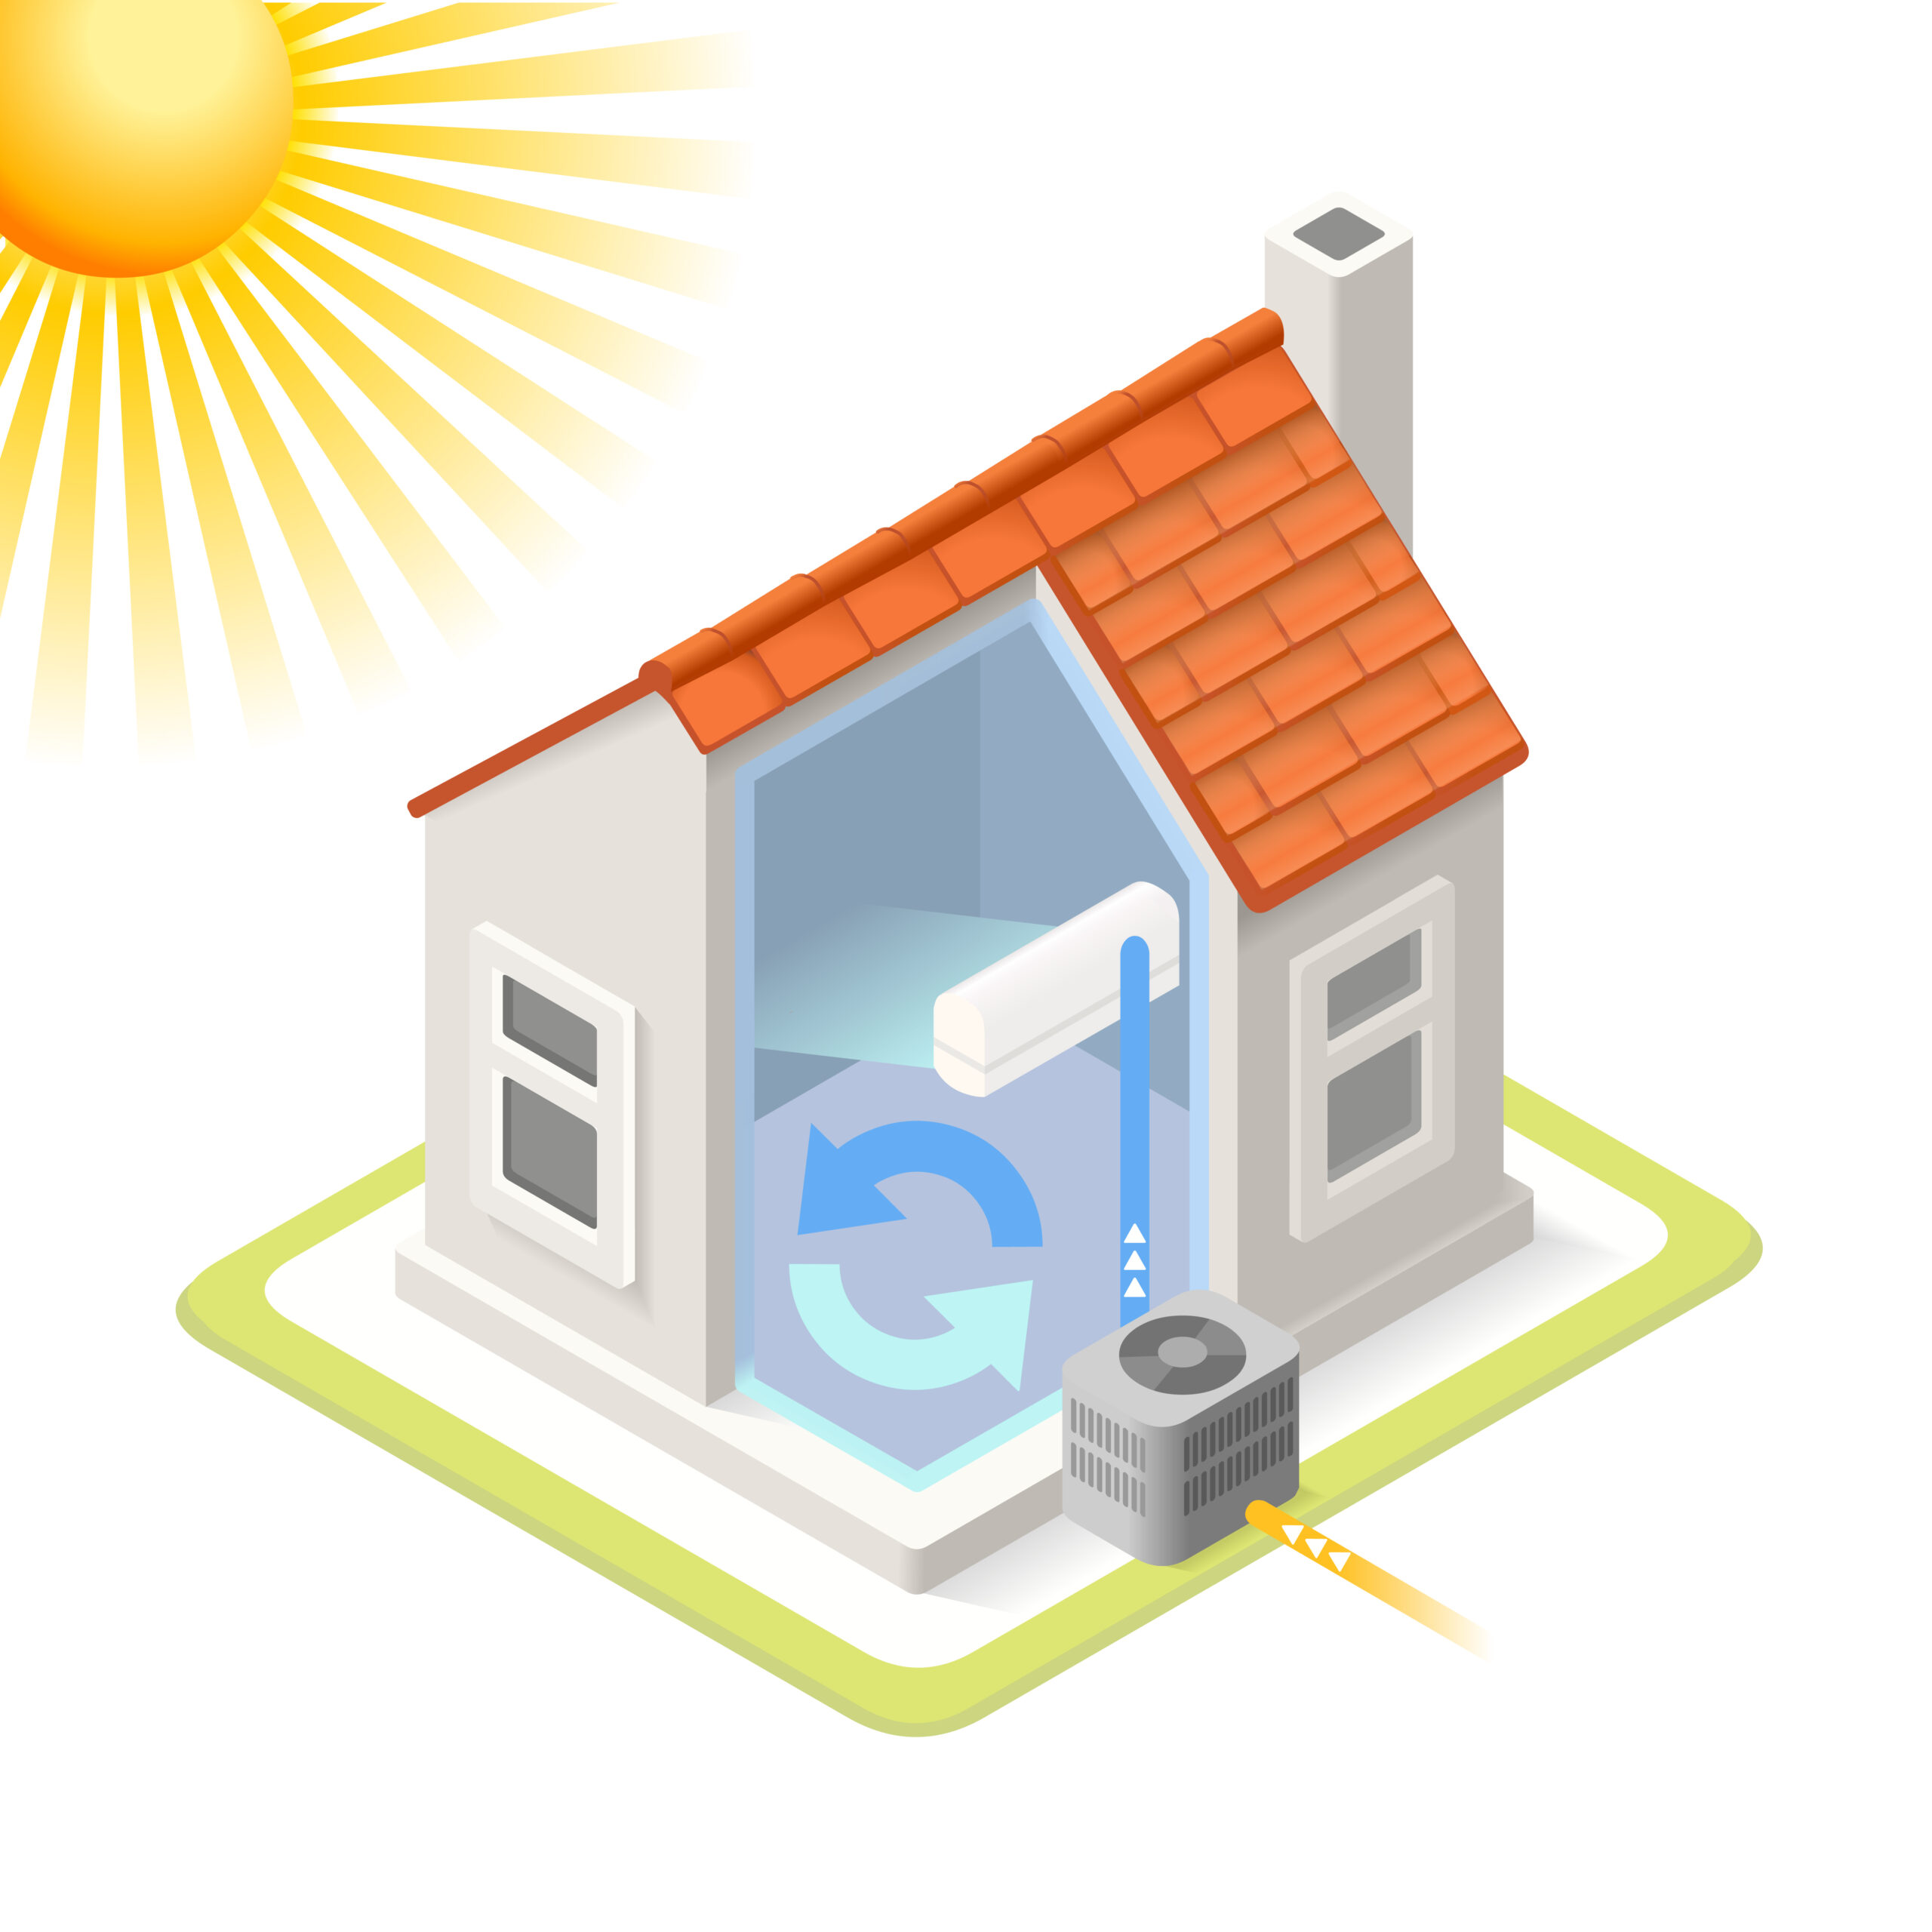 Home Cooling System Air Conditioning Unit House Heating Heat Pump Infographic